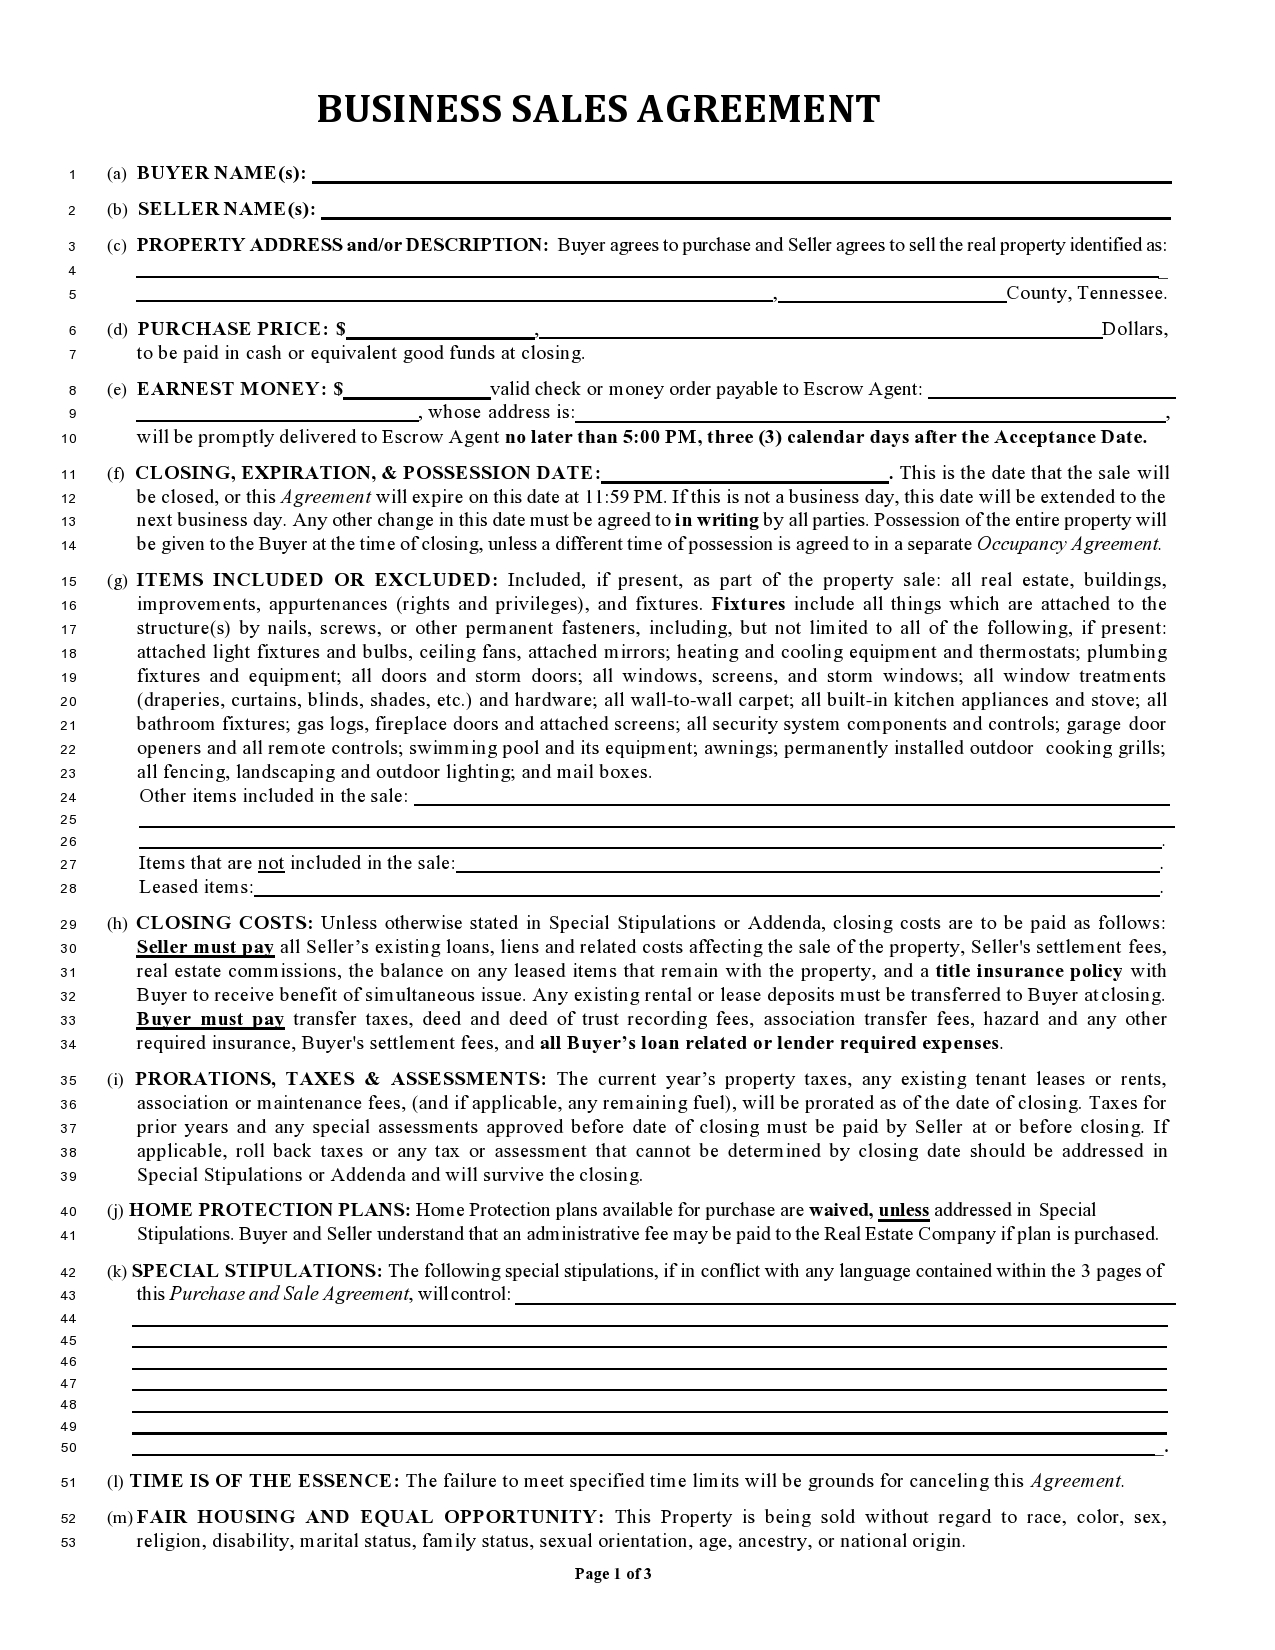 Free business purchase agreement 24